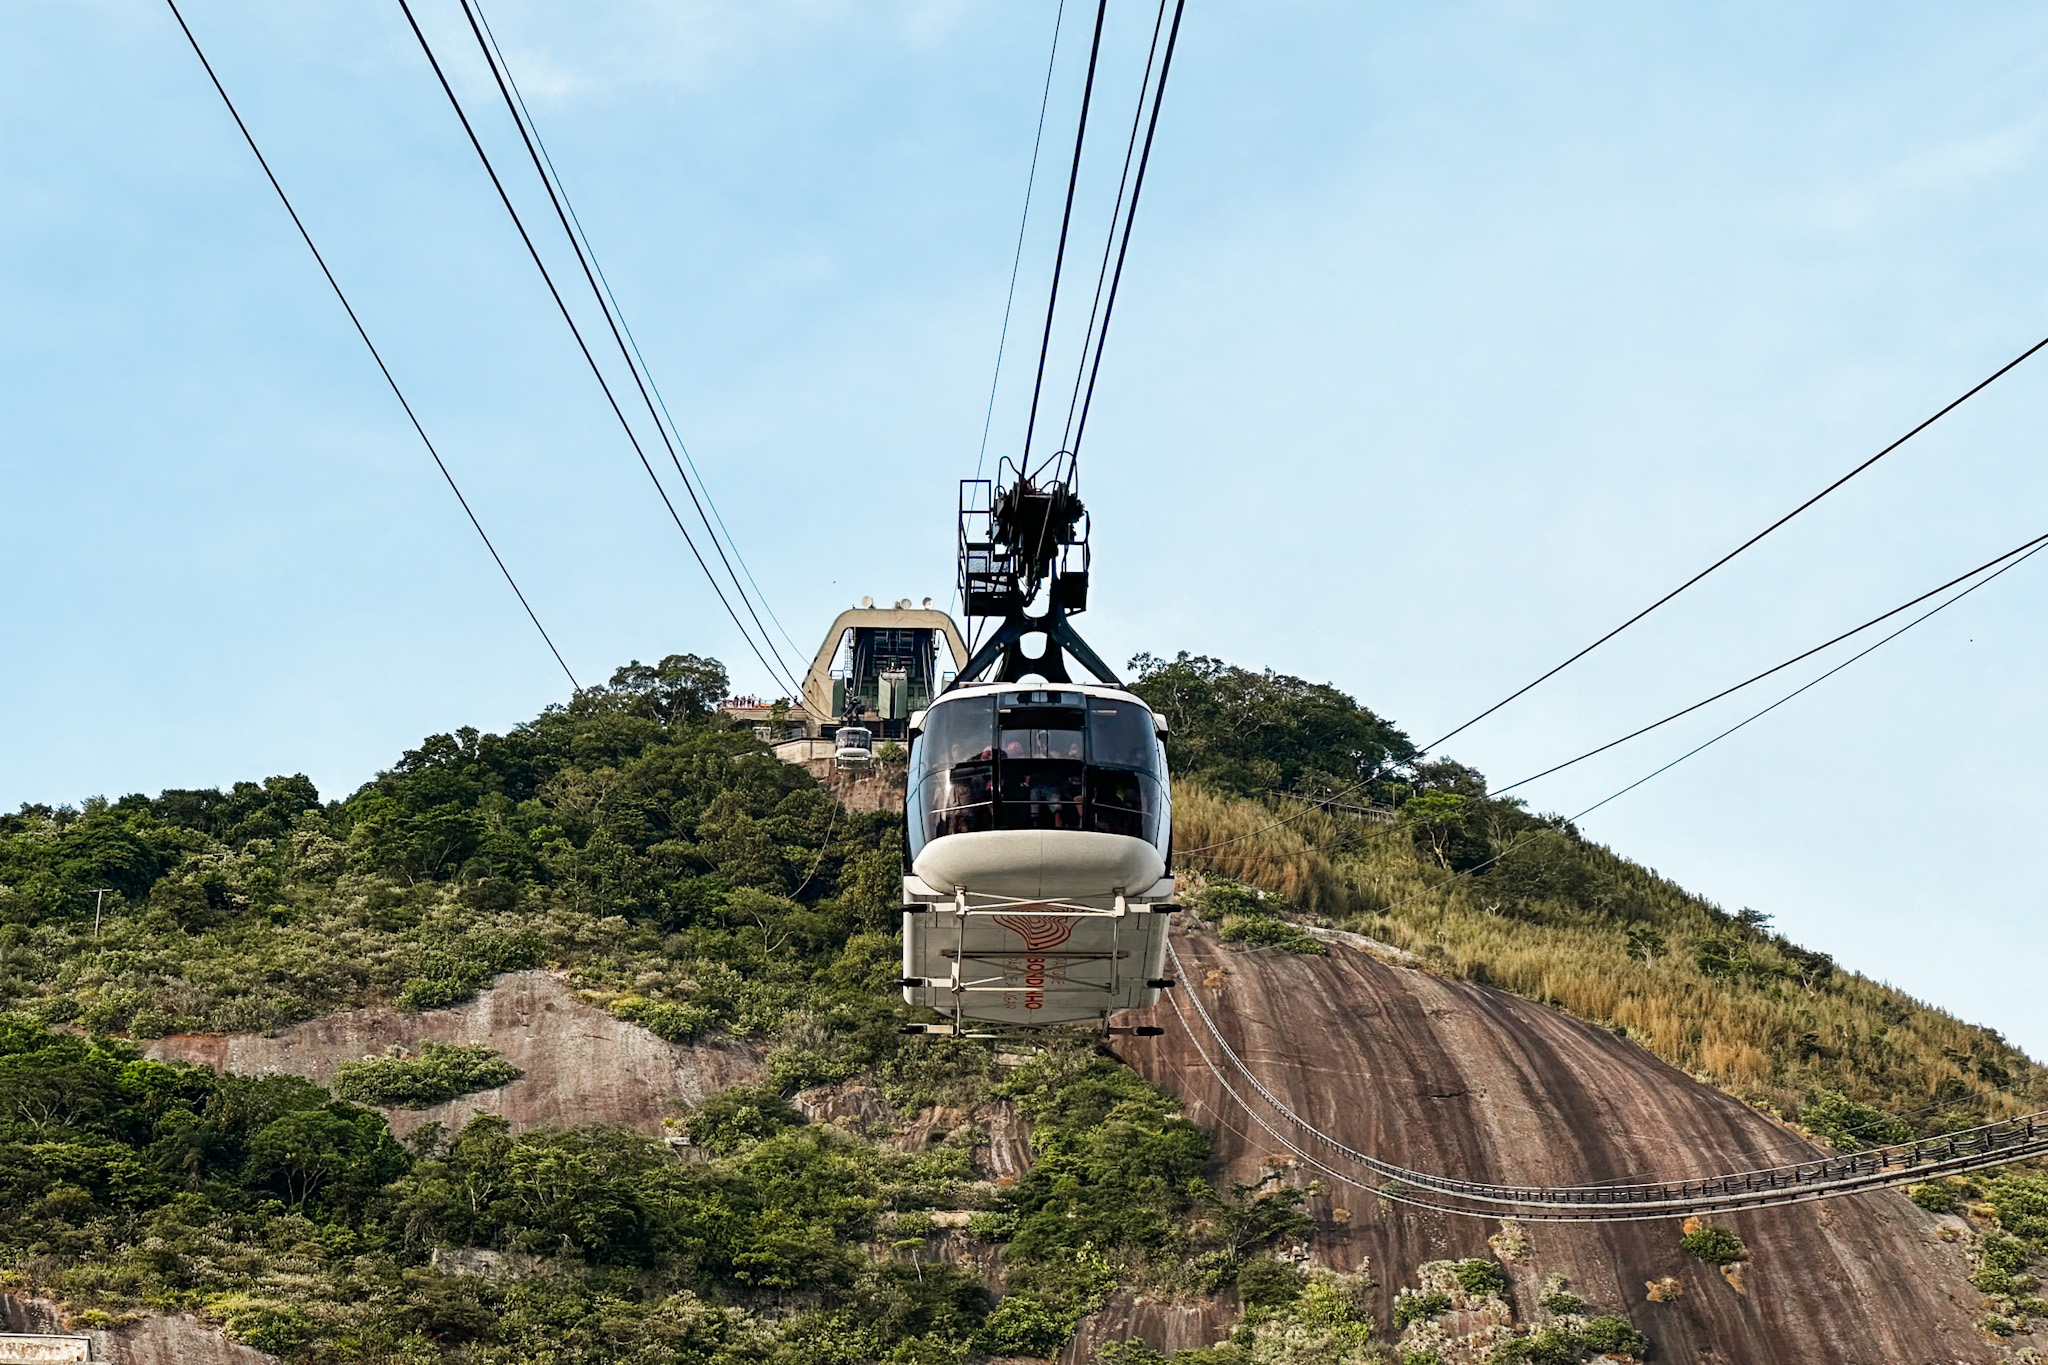 Things to do in Rio: Take a cable car on top of the Sugarloaf Mountain